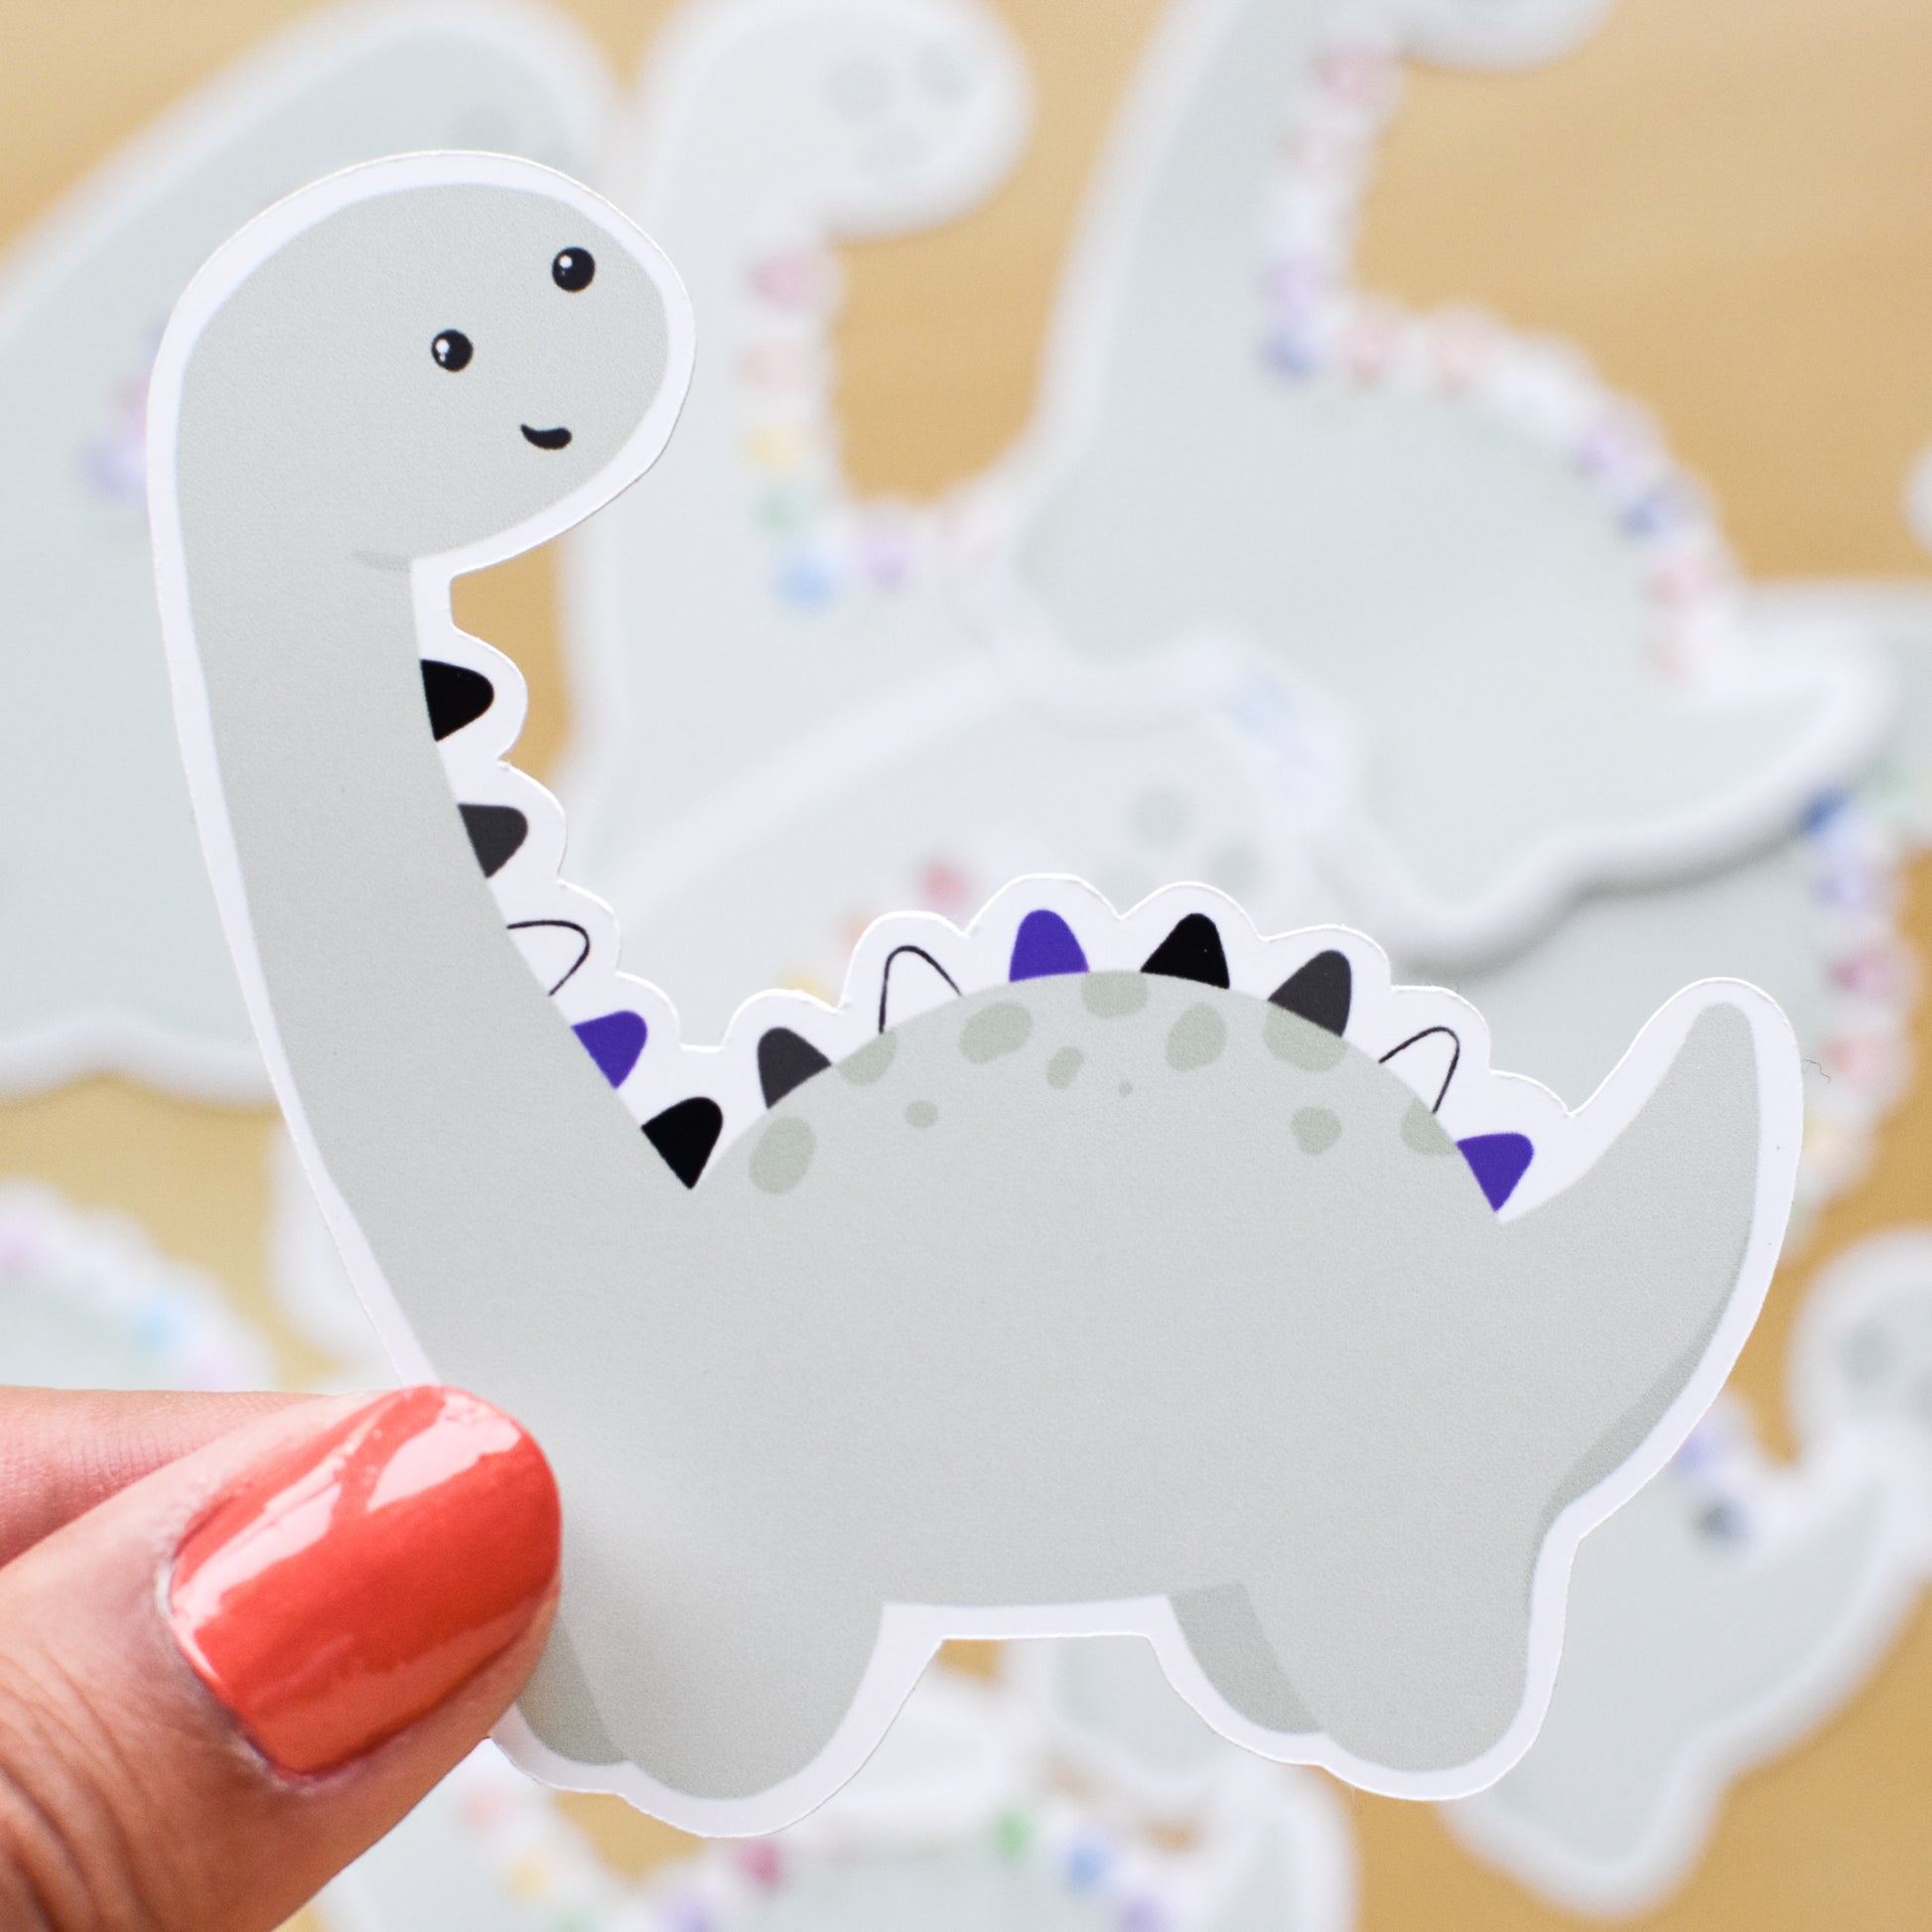 Pride dino stickers - 𝔬𝔣𝔣𝔟𝔢𝔞𝔱 𝔬𝔡𝔡𝔦𝔱𝔦𝔢𝔰's Ko-fi Shop - Ko-fi  ❤️ Where creators get support from fans through donations, memberships,  shop sales and more! The original 'Buy Me a Coffee' Page.